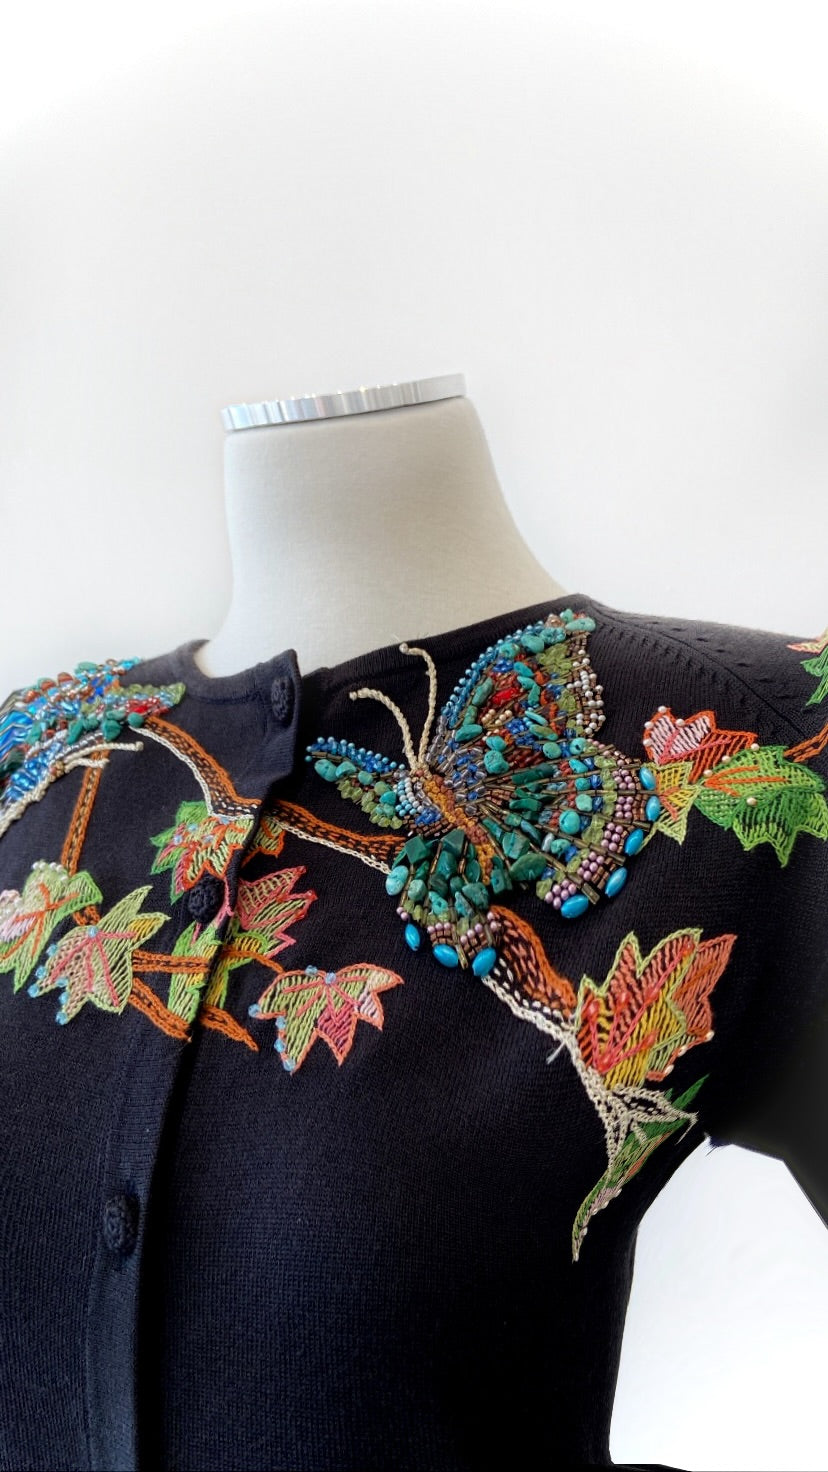 Vintage - Embroidered Cardigan with Intricate Butterflies